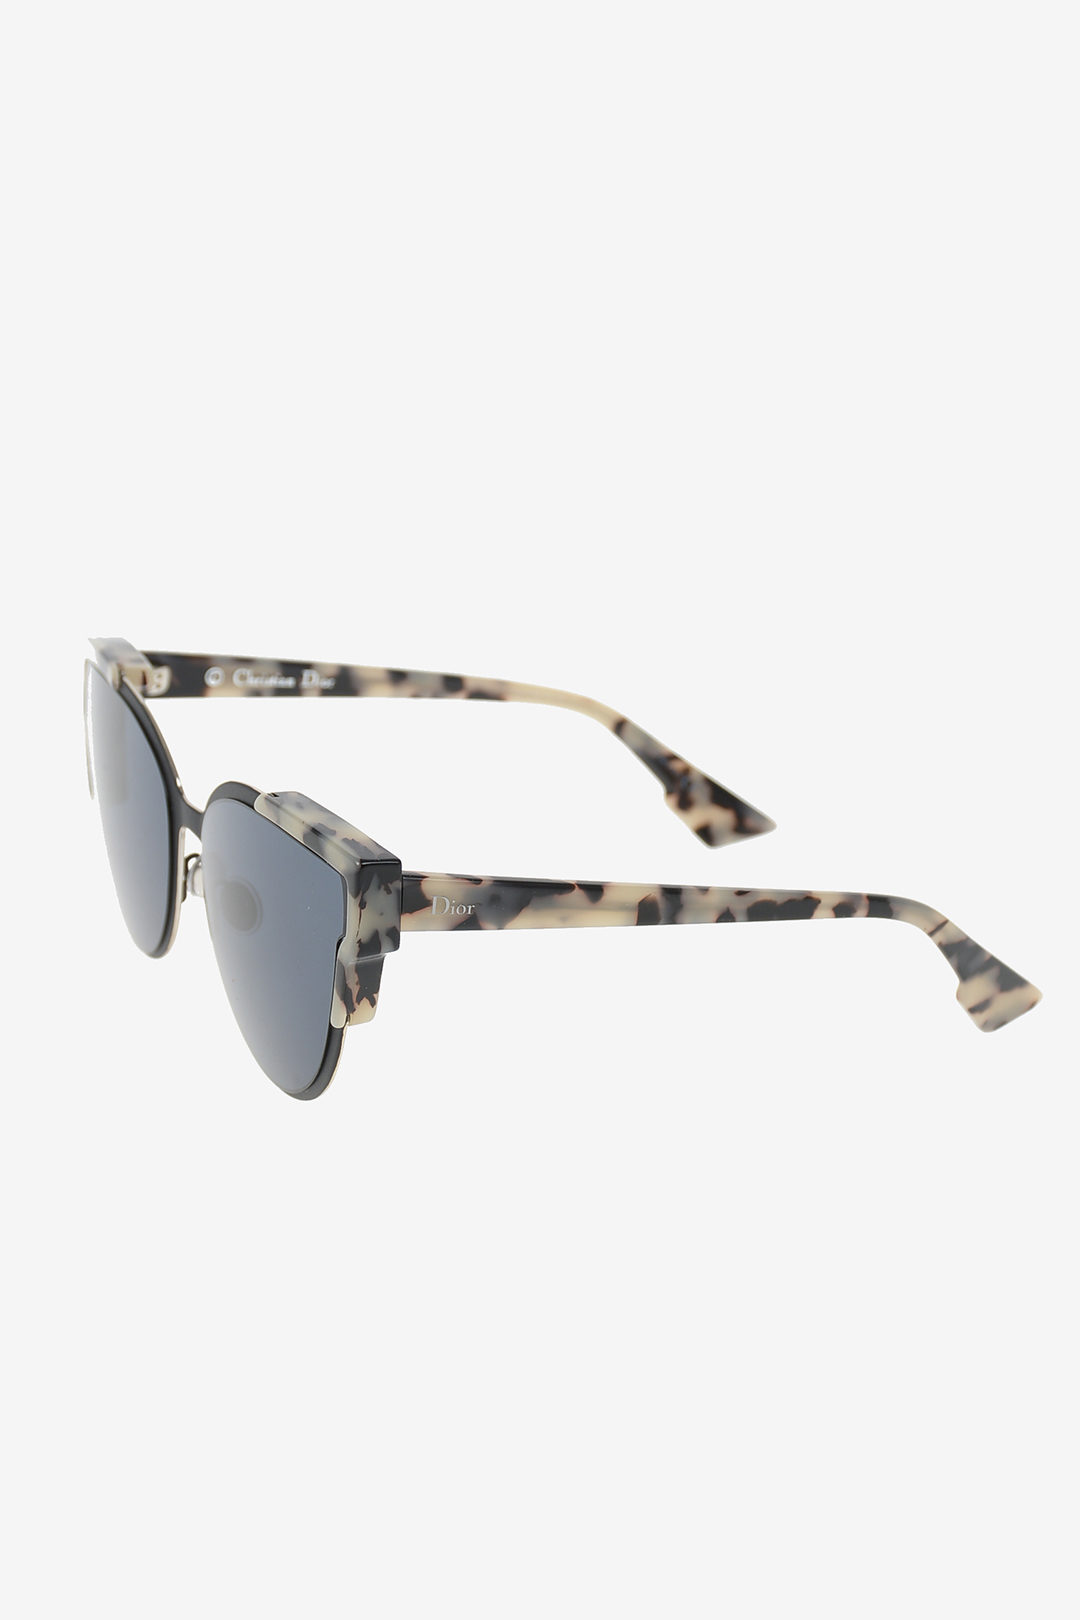 Dior Outlet Christian acetate sunglasses  Black  Dior sunglasses  DIORINSIDEOUT2 online on GIGLIOCOM